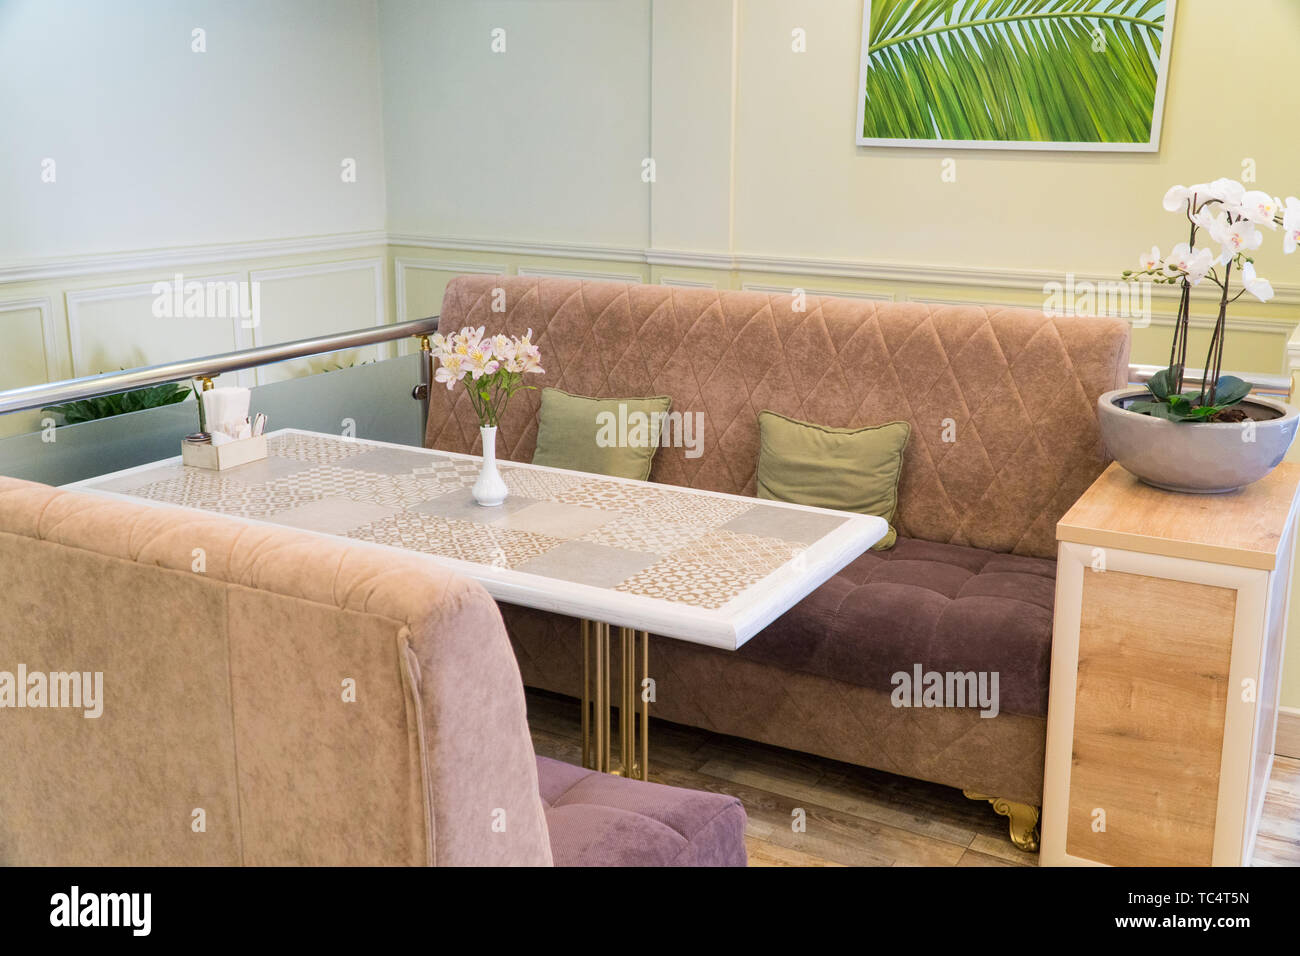 modern restaurant interior with sofa and flowers Stock Photo - Alamy